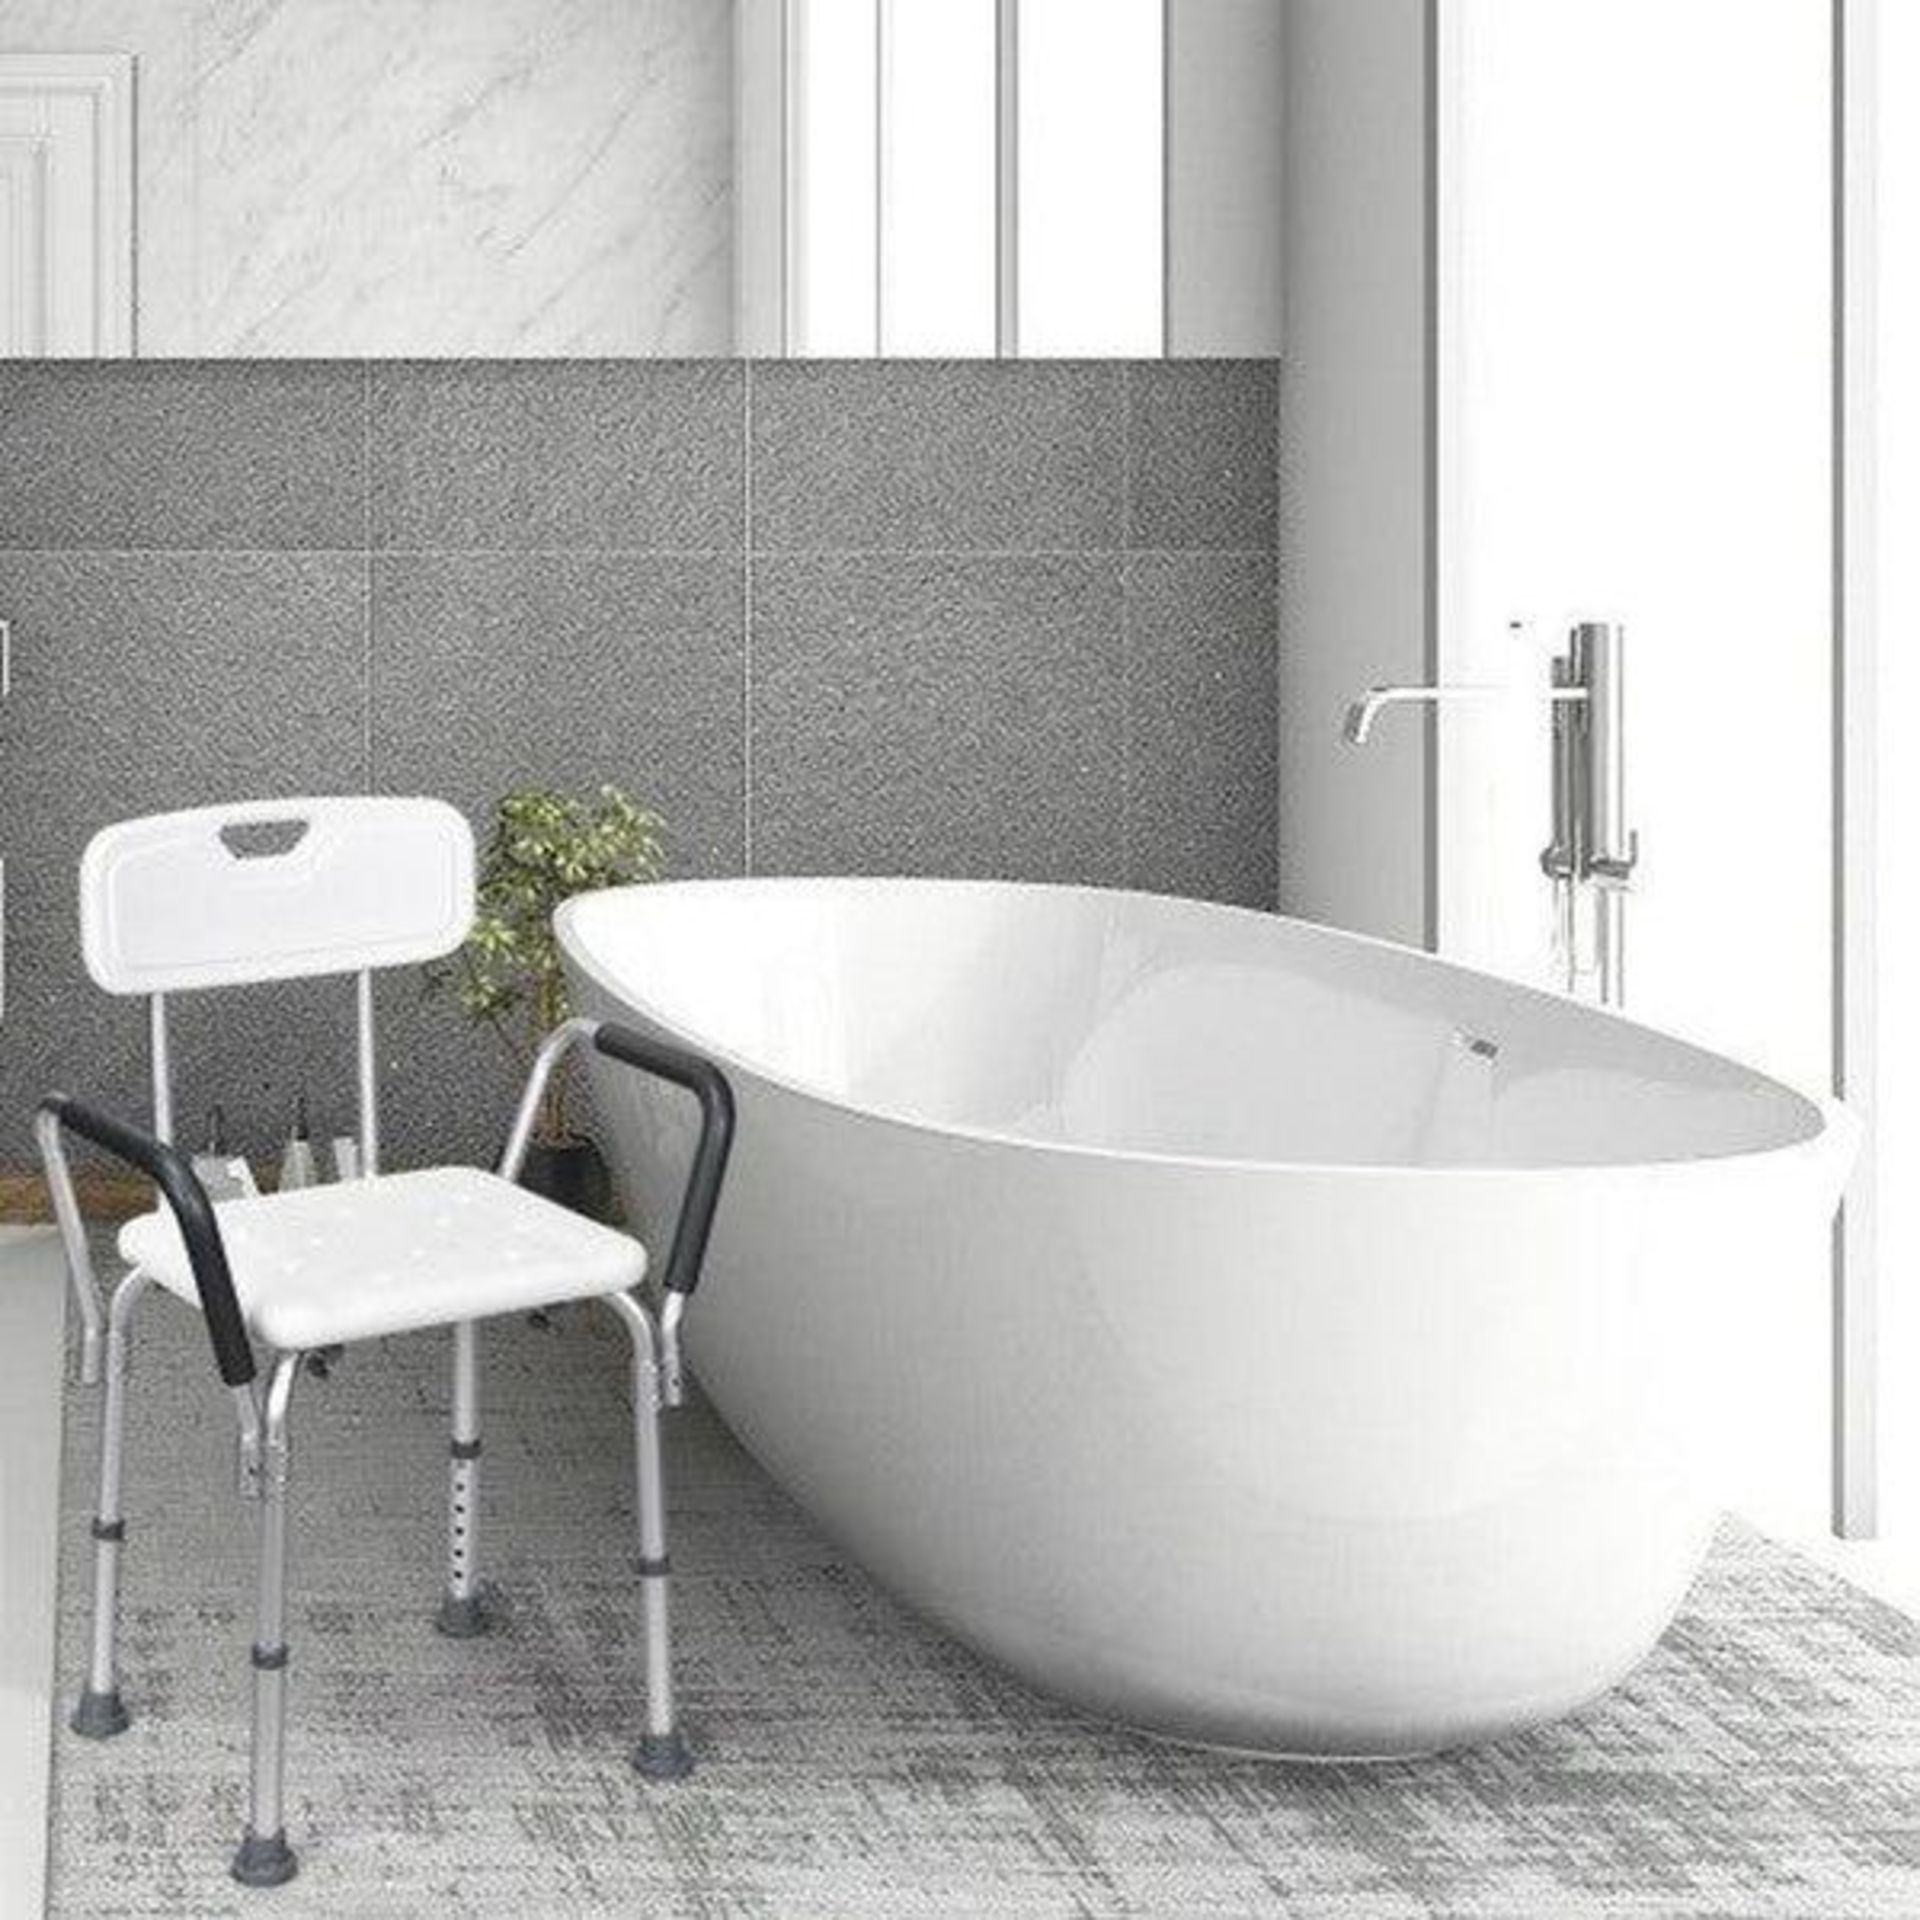 6 Adjustable Height Safety Bathtub Shower Chair with 330lbs Large Weight Capacity. - ER26